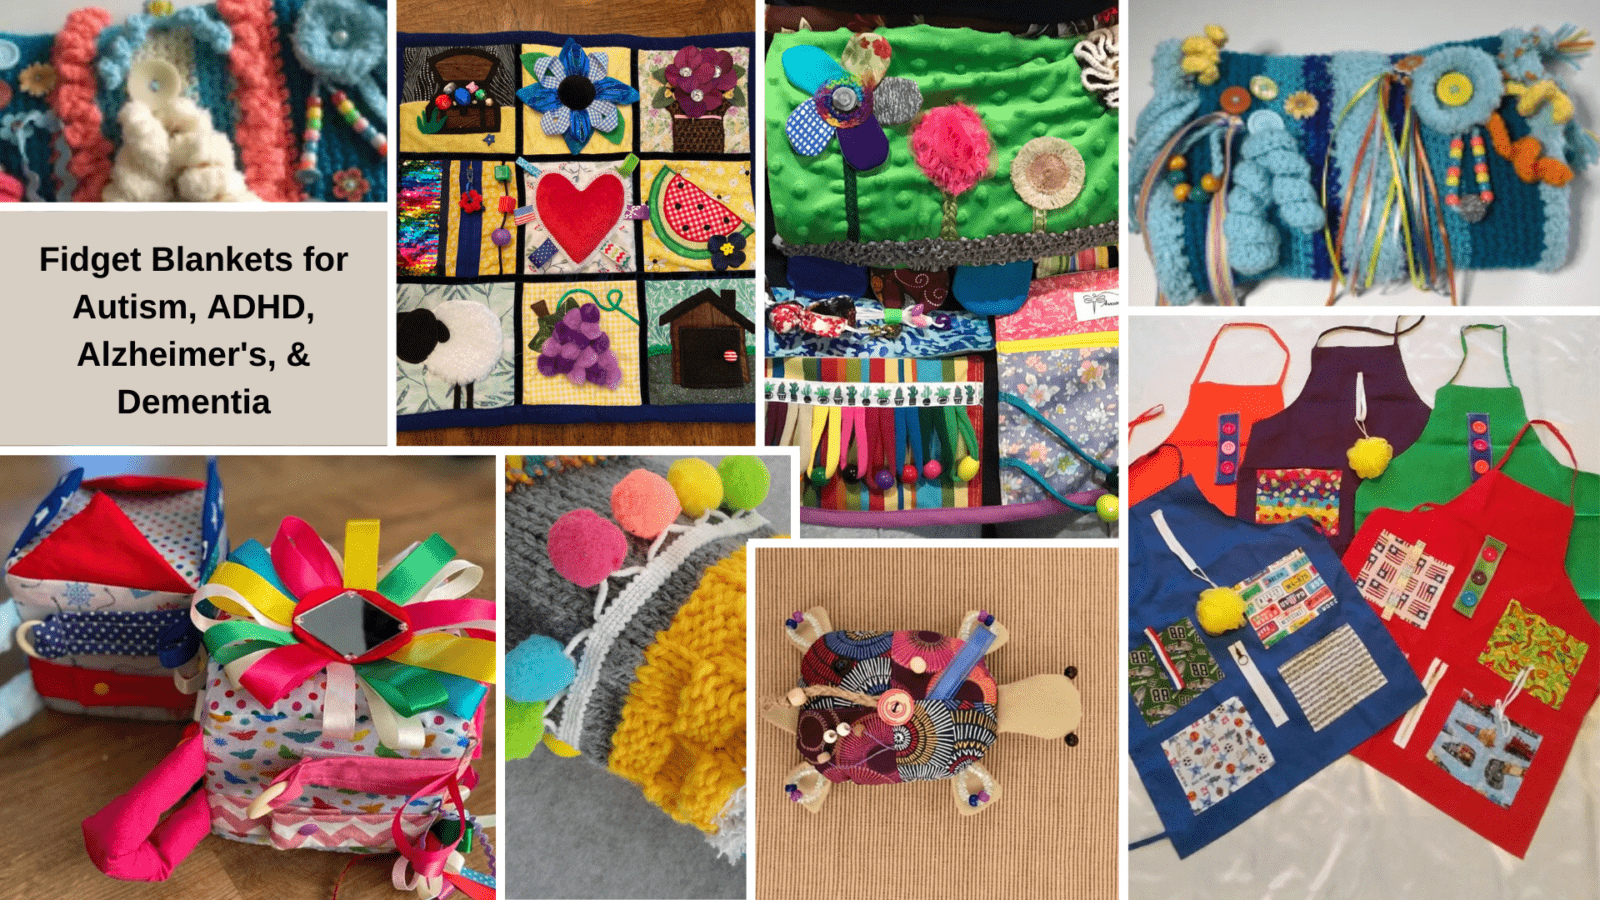 20 Fidget Blankets for Autism, ADHD, Alzheimer’s, and Sensory Needs